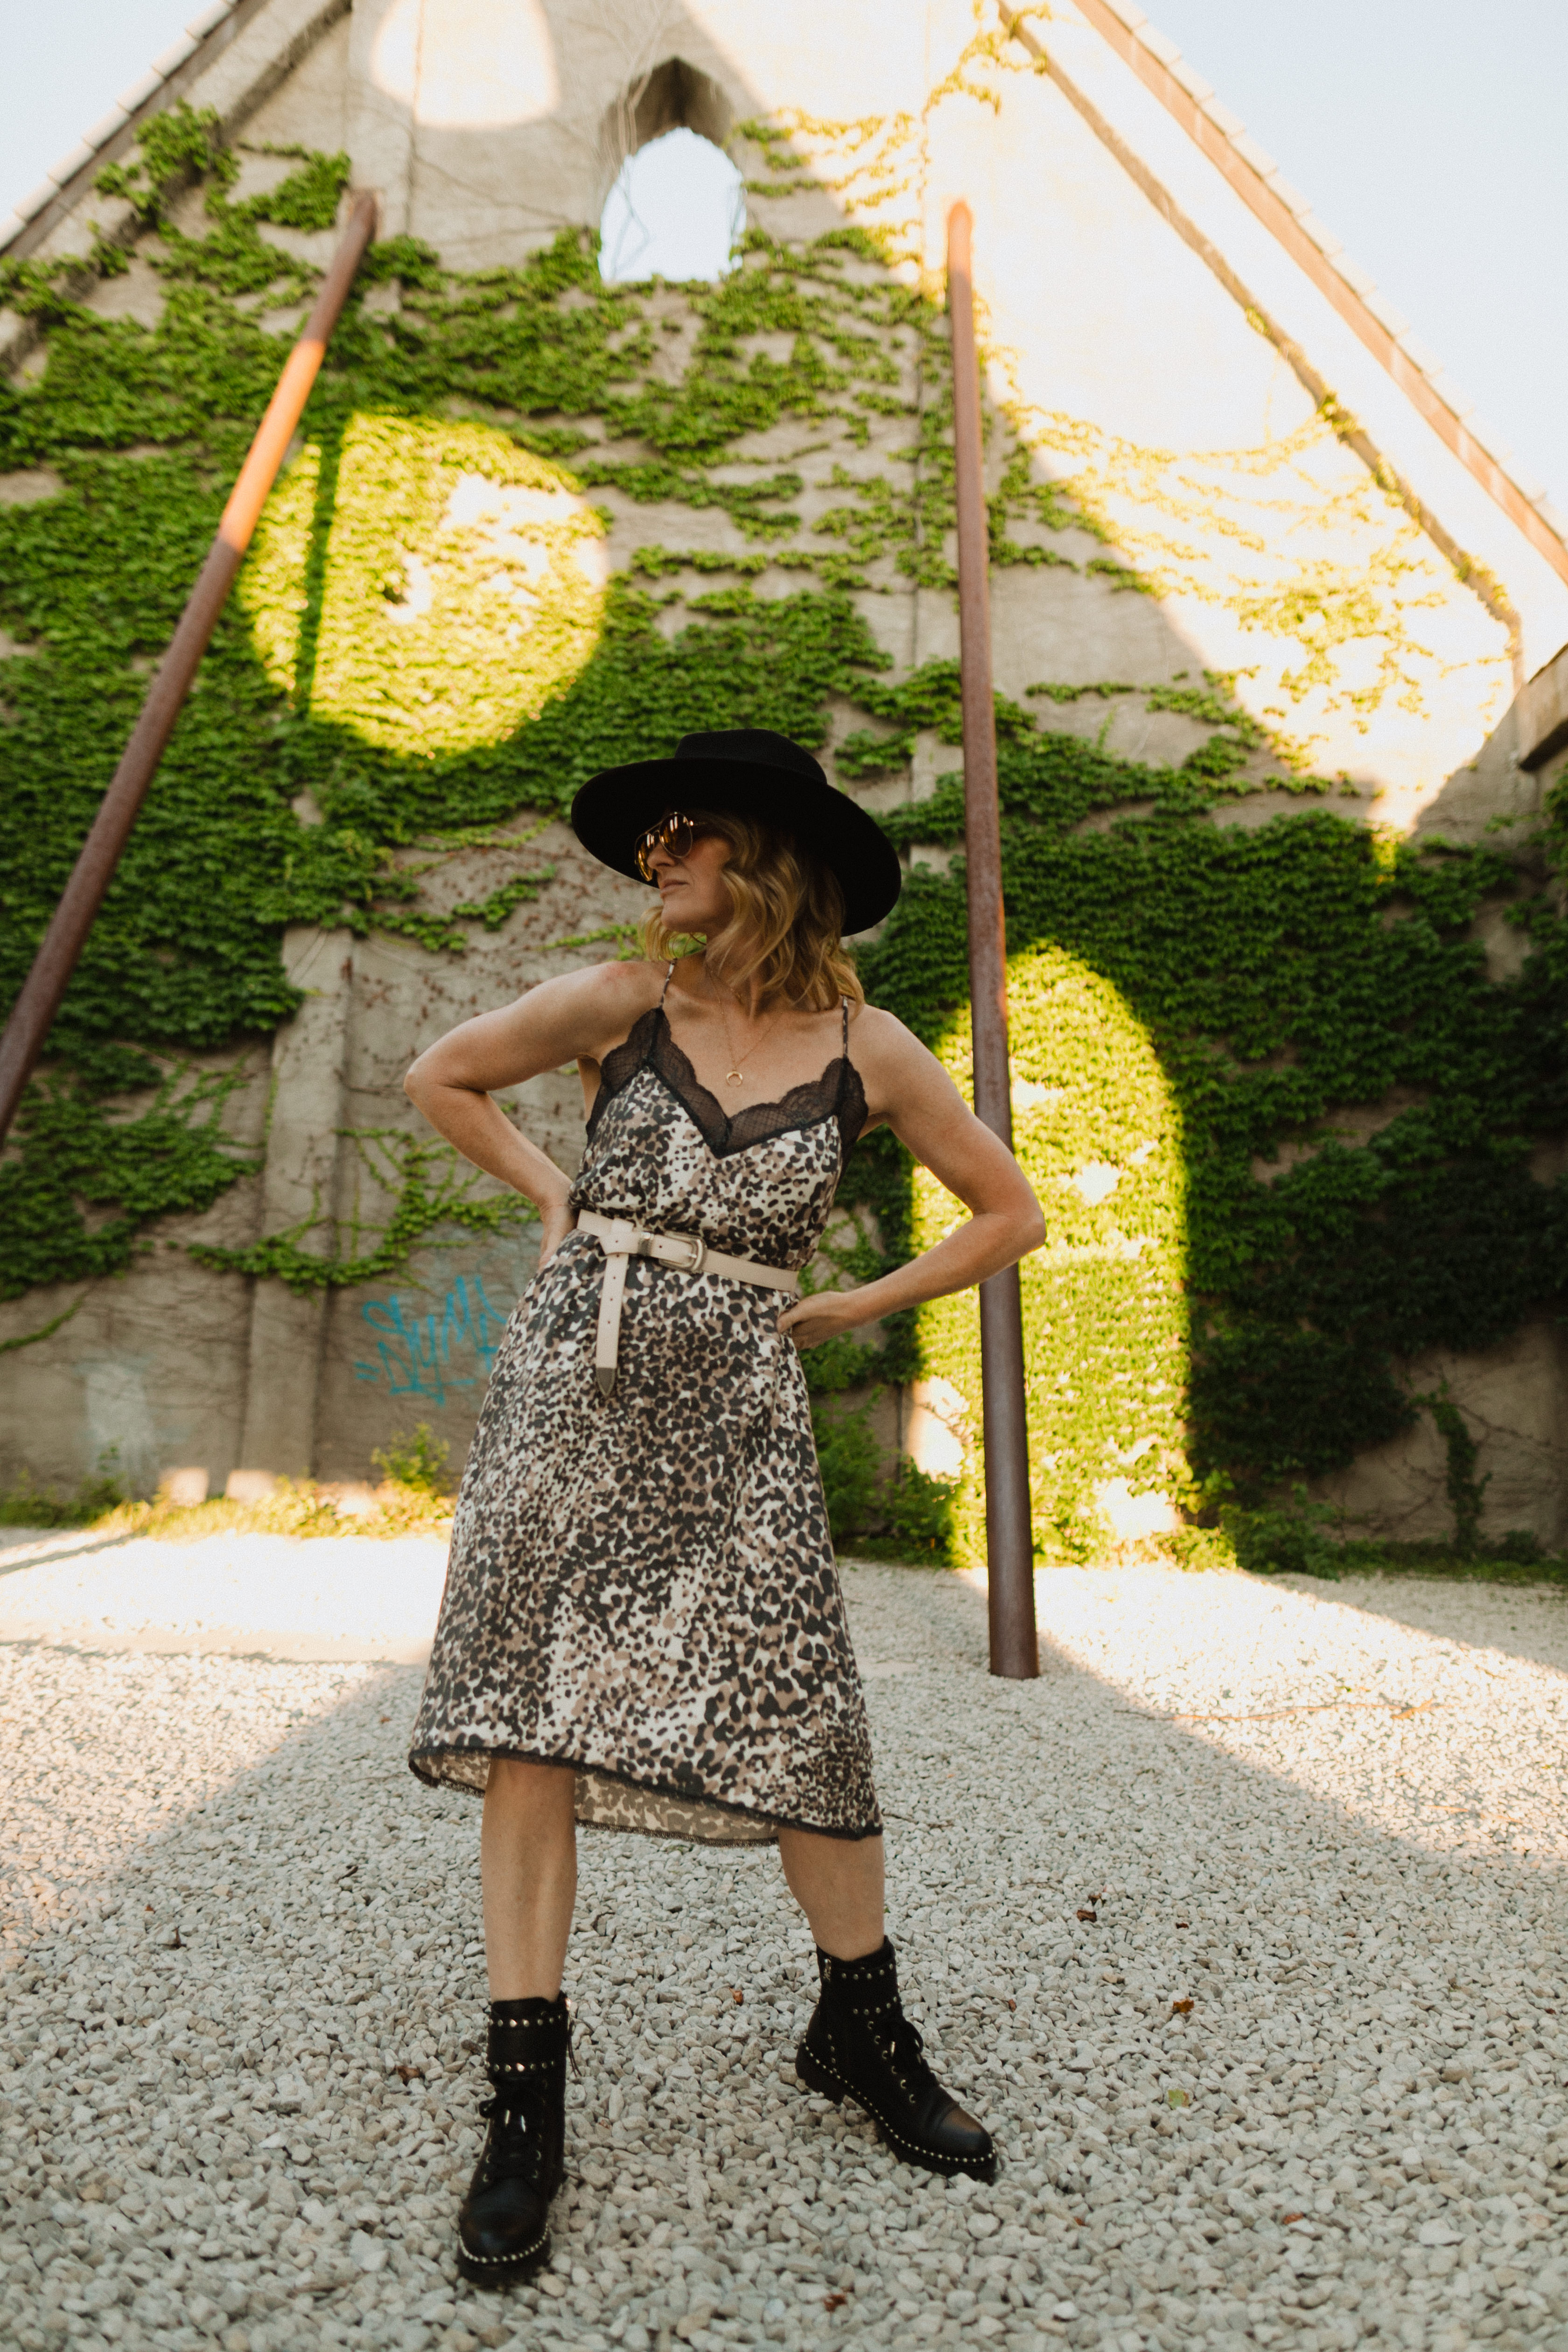 Lovestitch Clothing: 7 Outfits To Wear This Summer | leopard dress outfit night | leopard dress outfit summer | leopard slip dress outfit | leopard slip dress outfit ideas | slip dress outfit casual | slip dress outfit summer | Oh Darling Blog